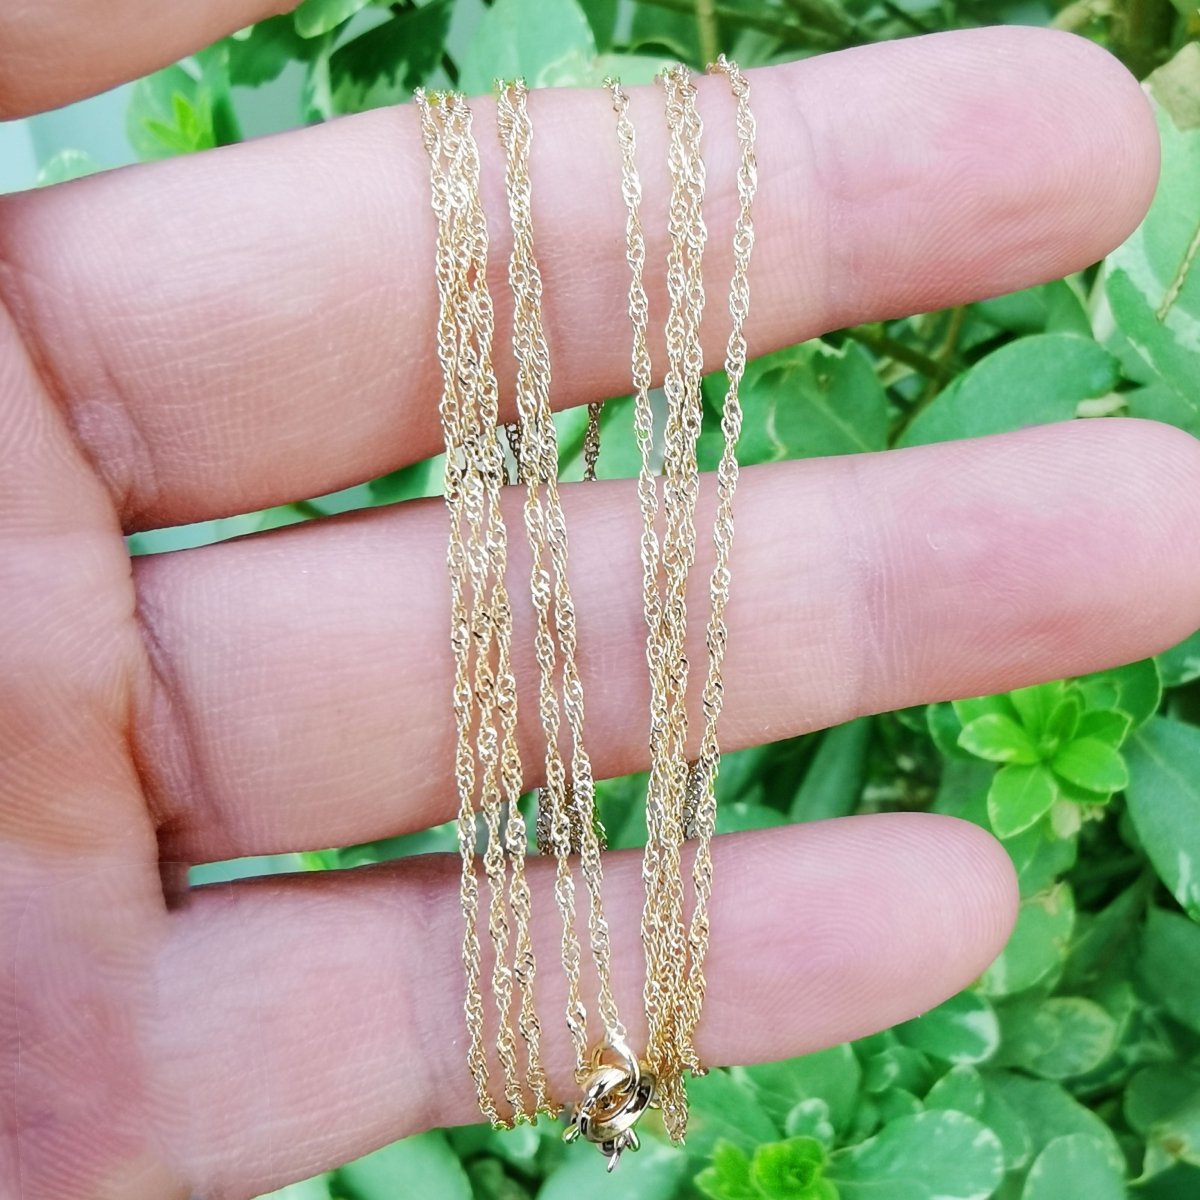 OS Dainty Singapore Chain Gold Twist Chain Necklace -Finished Twist Link Chain Layering Necklace 1.2mm 17.5 inch ready to wear with Charm, 14K Gold Filled Singapore | WA-774 Clearance Pricing - DLUXCA